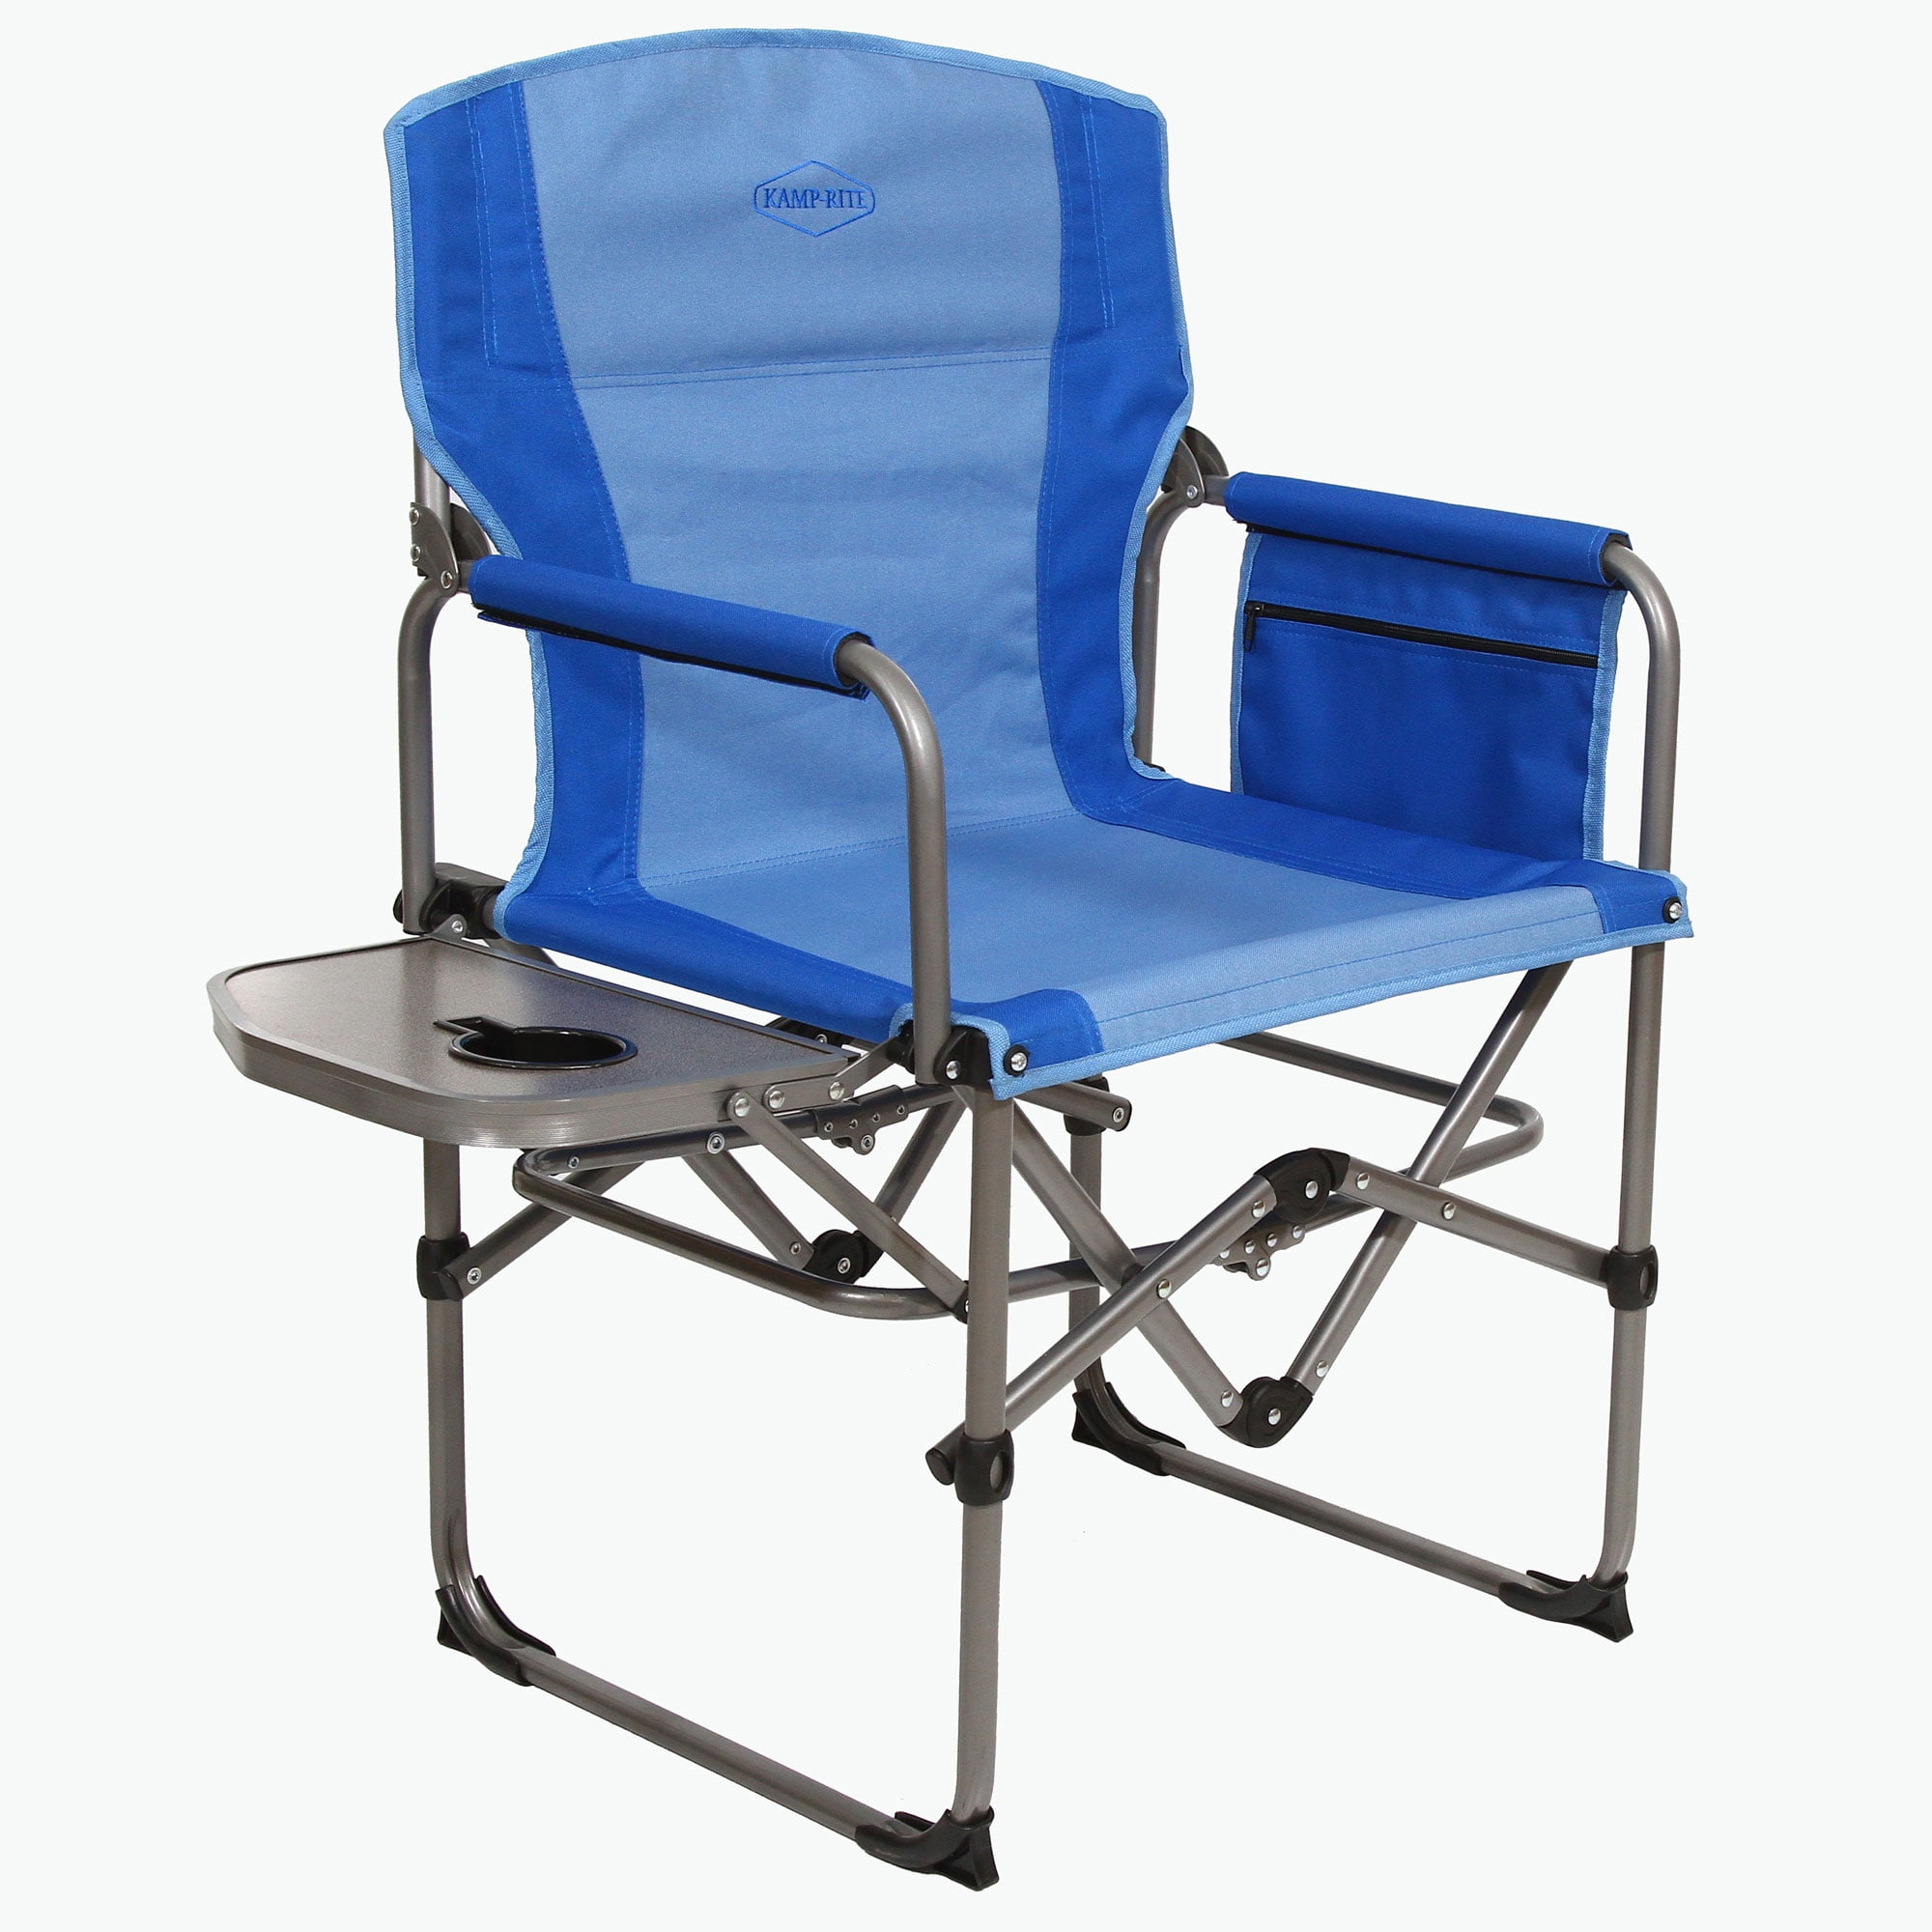 KampRite Outdoor Camping Folding Compact Director's Chair w/ Side